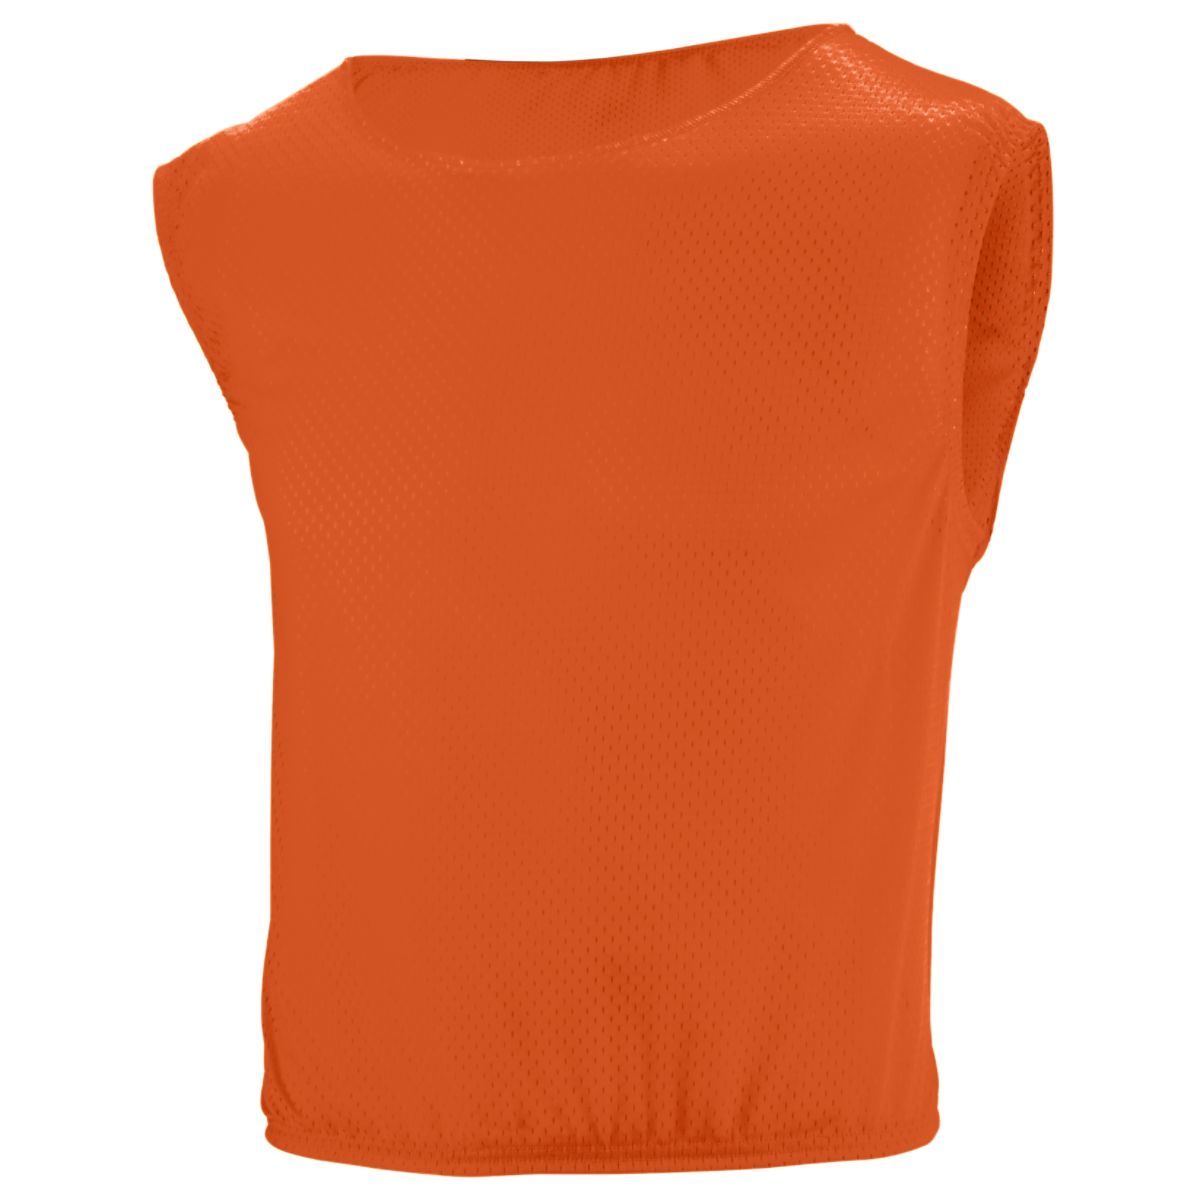 Augusta Sportswear Youth Scrimmage Vest in Orange  -Part of the Youth, Augusta-Products, Football, Outerwear, All-Sports, All-Sports-1 product lines at KanaleyCreations.com